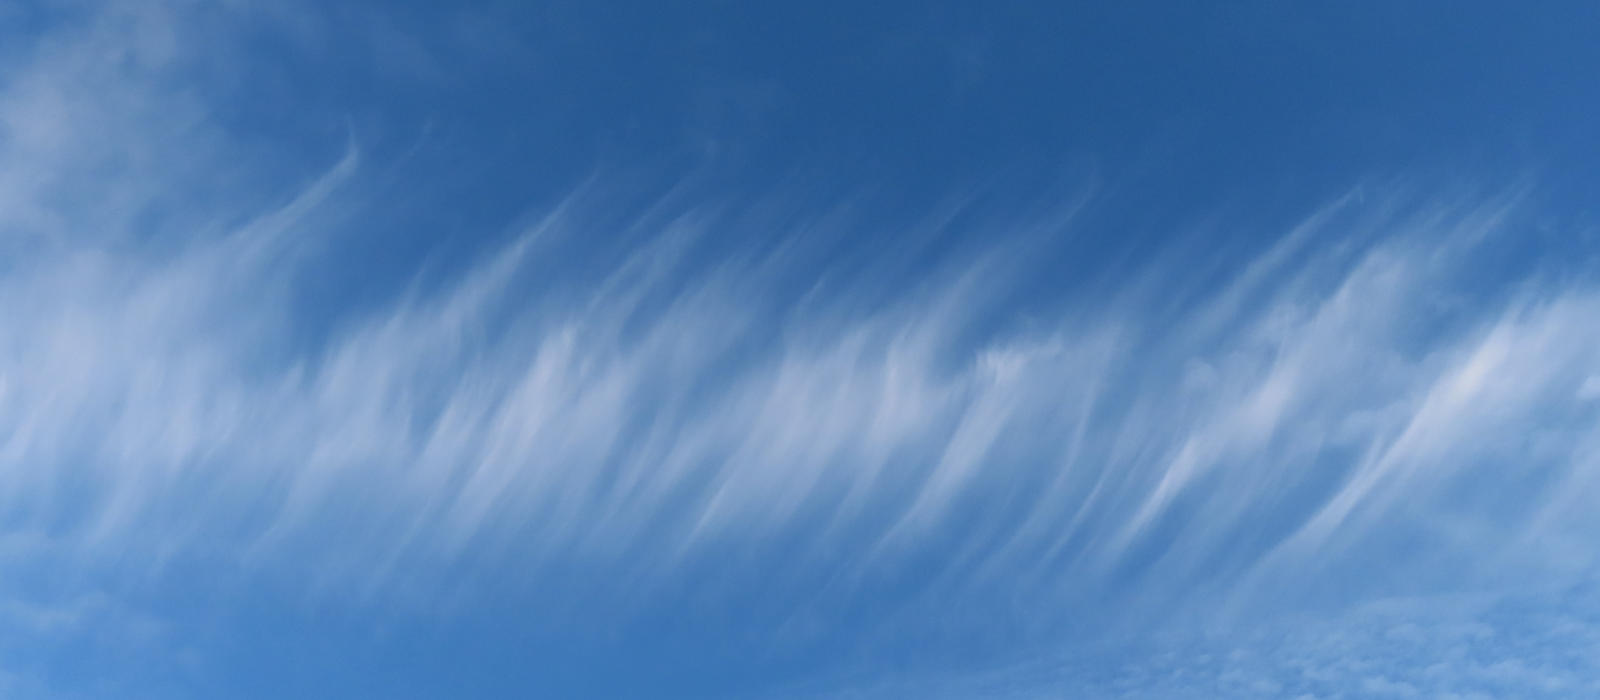 A photograph of a blue sky with thin cirrus clouds that look like a series of slashes. Own work 2023.